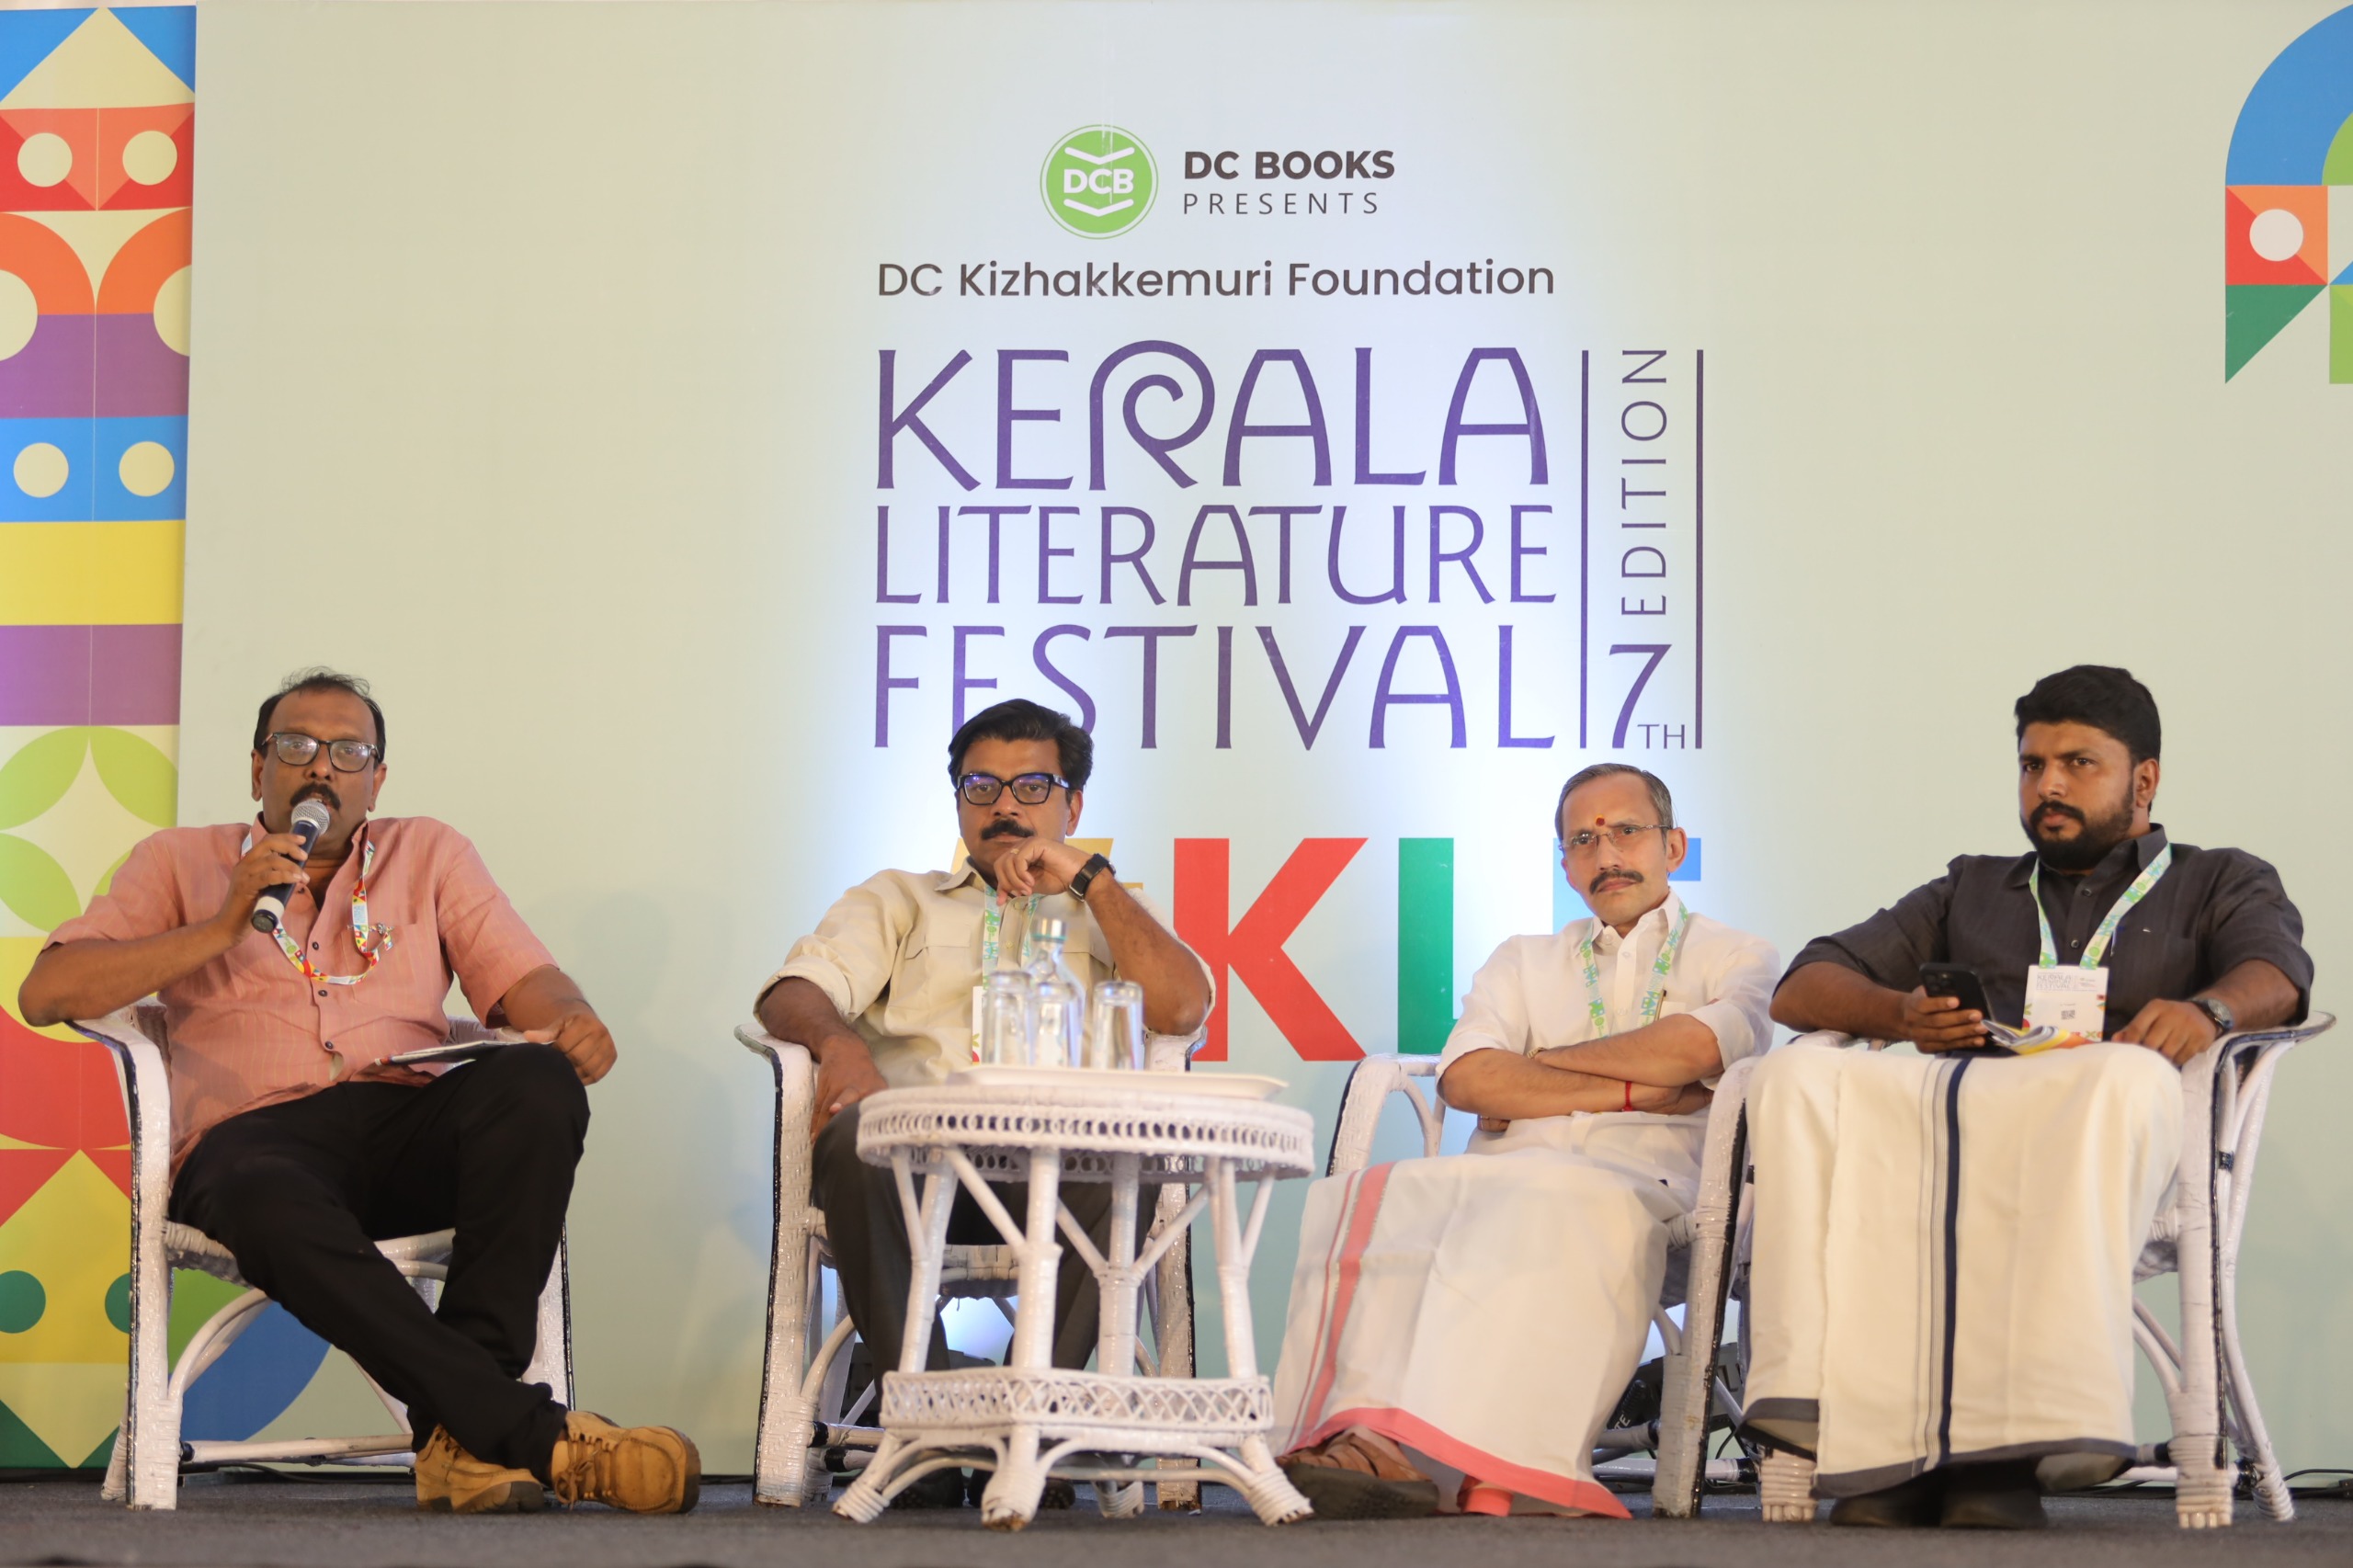 DEBATING MEDIA INFLUENCE: POLITICAL ACTIVISTS DISCUSS THE ROLE OF MEDIA IN MODERN POLITICS AT THE 7TH KERALA LITERATURE FESTIVAL